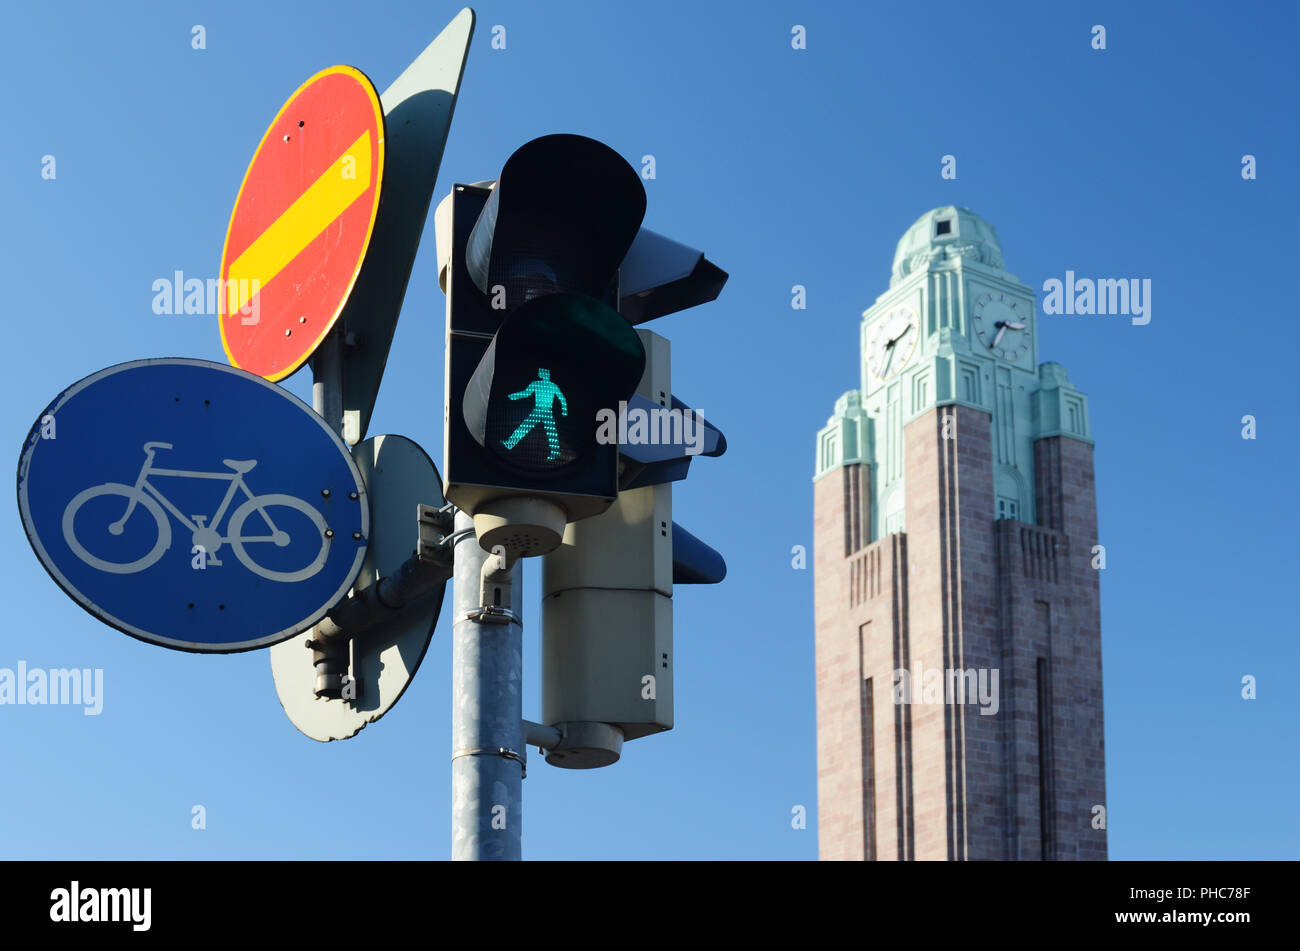 traffic lights and road signs against sky Stock Photo